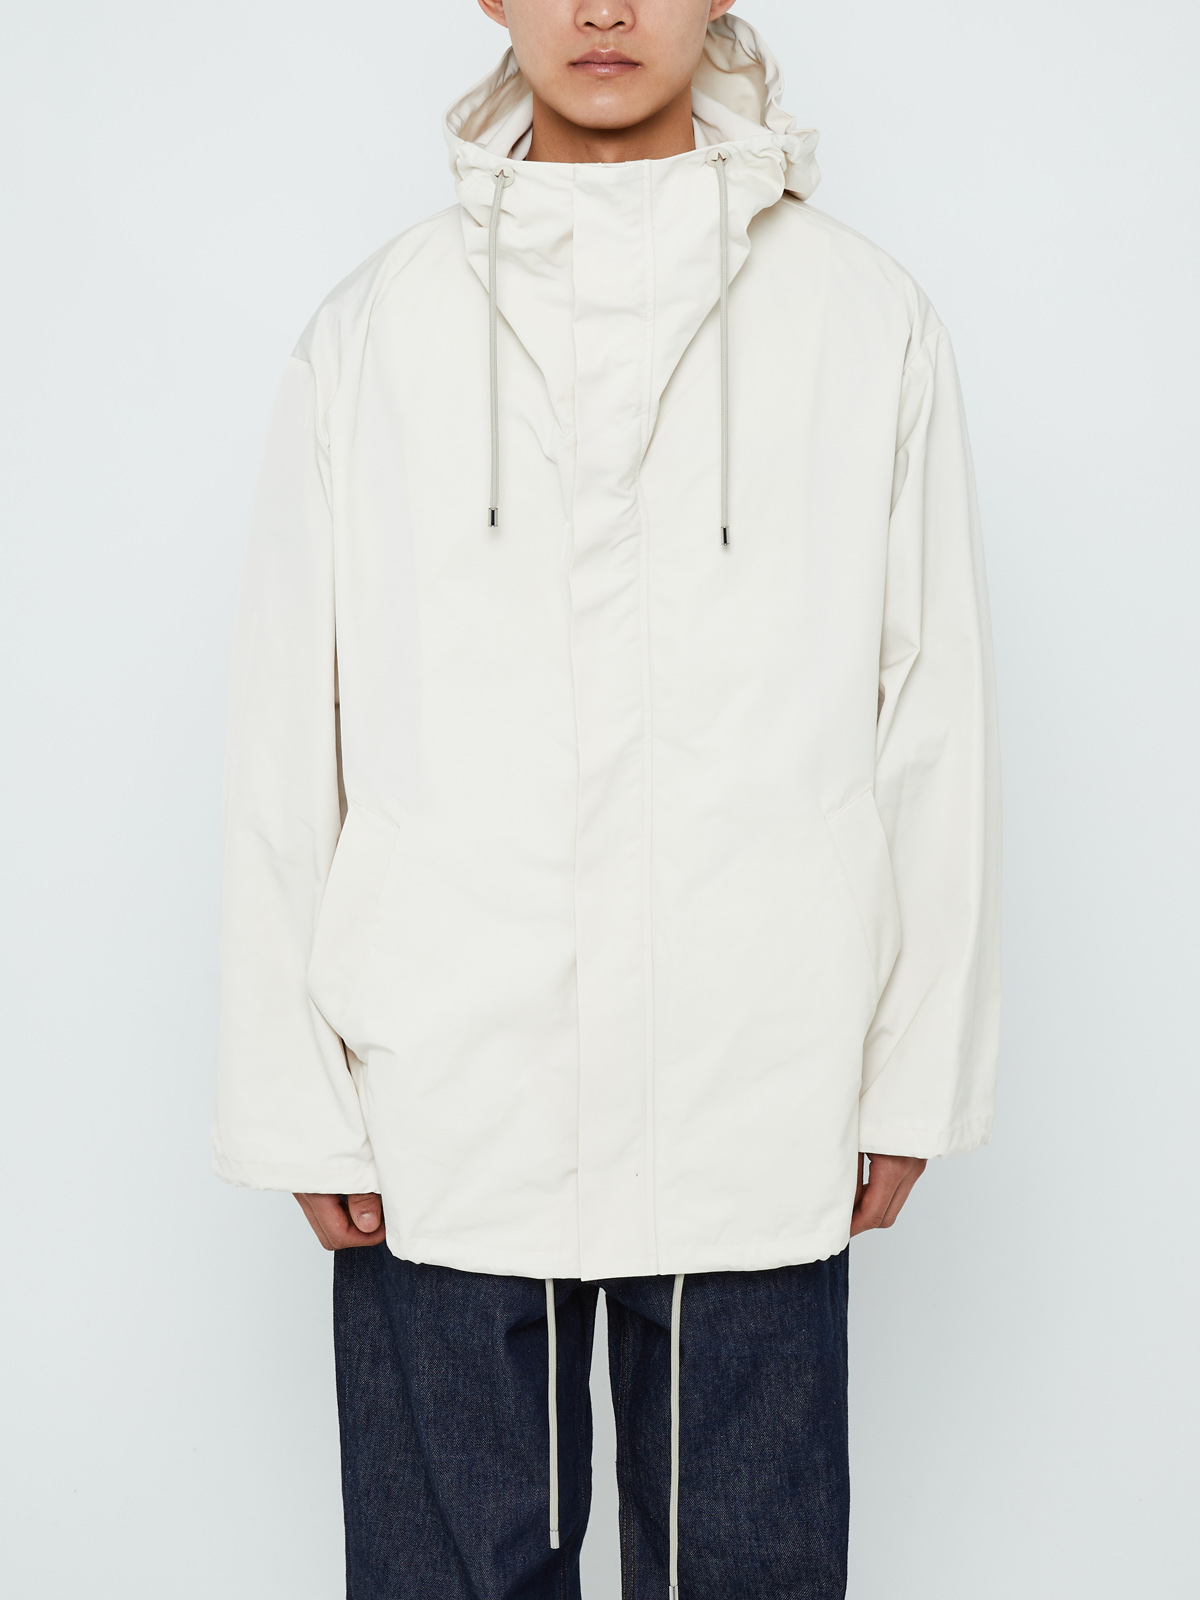 HIGH DENSITY COTTON POLYESTER CLOTH HOODED BLOUSON (IVORY)